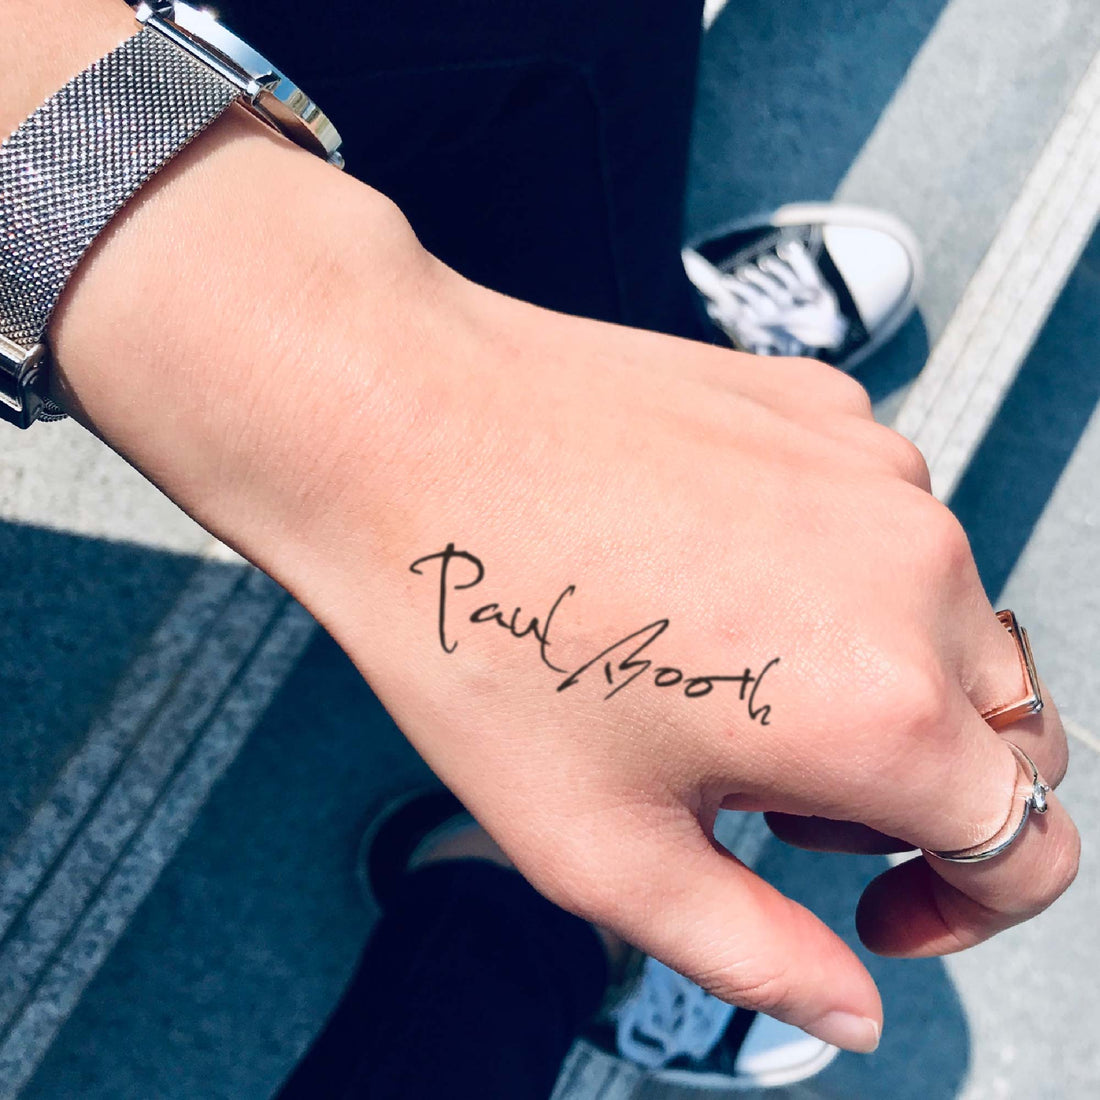 Paul Booth custom temporary tattoo sticker design idea inspiration meanings removal arm wrist hand words font name signature calligraphy lyrics tour concert outfits merch accessory gift souvenir costumes wear dress up code